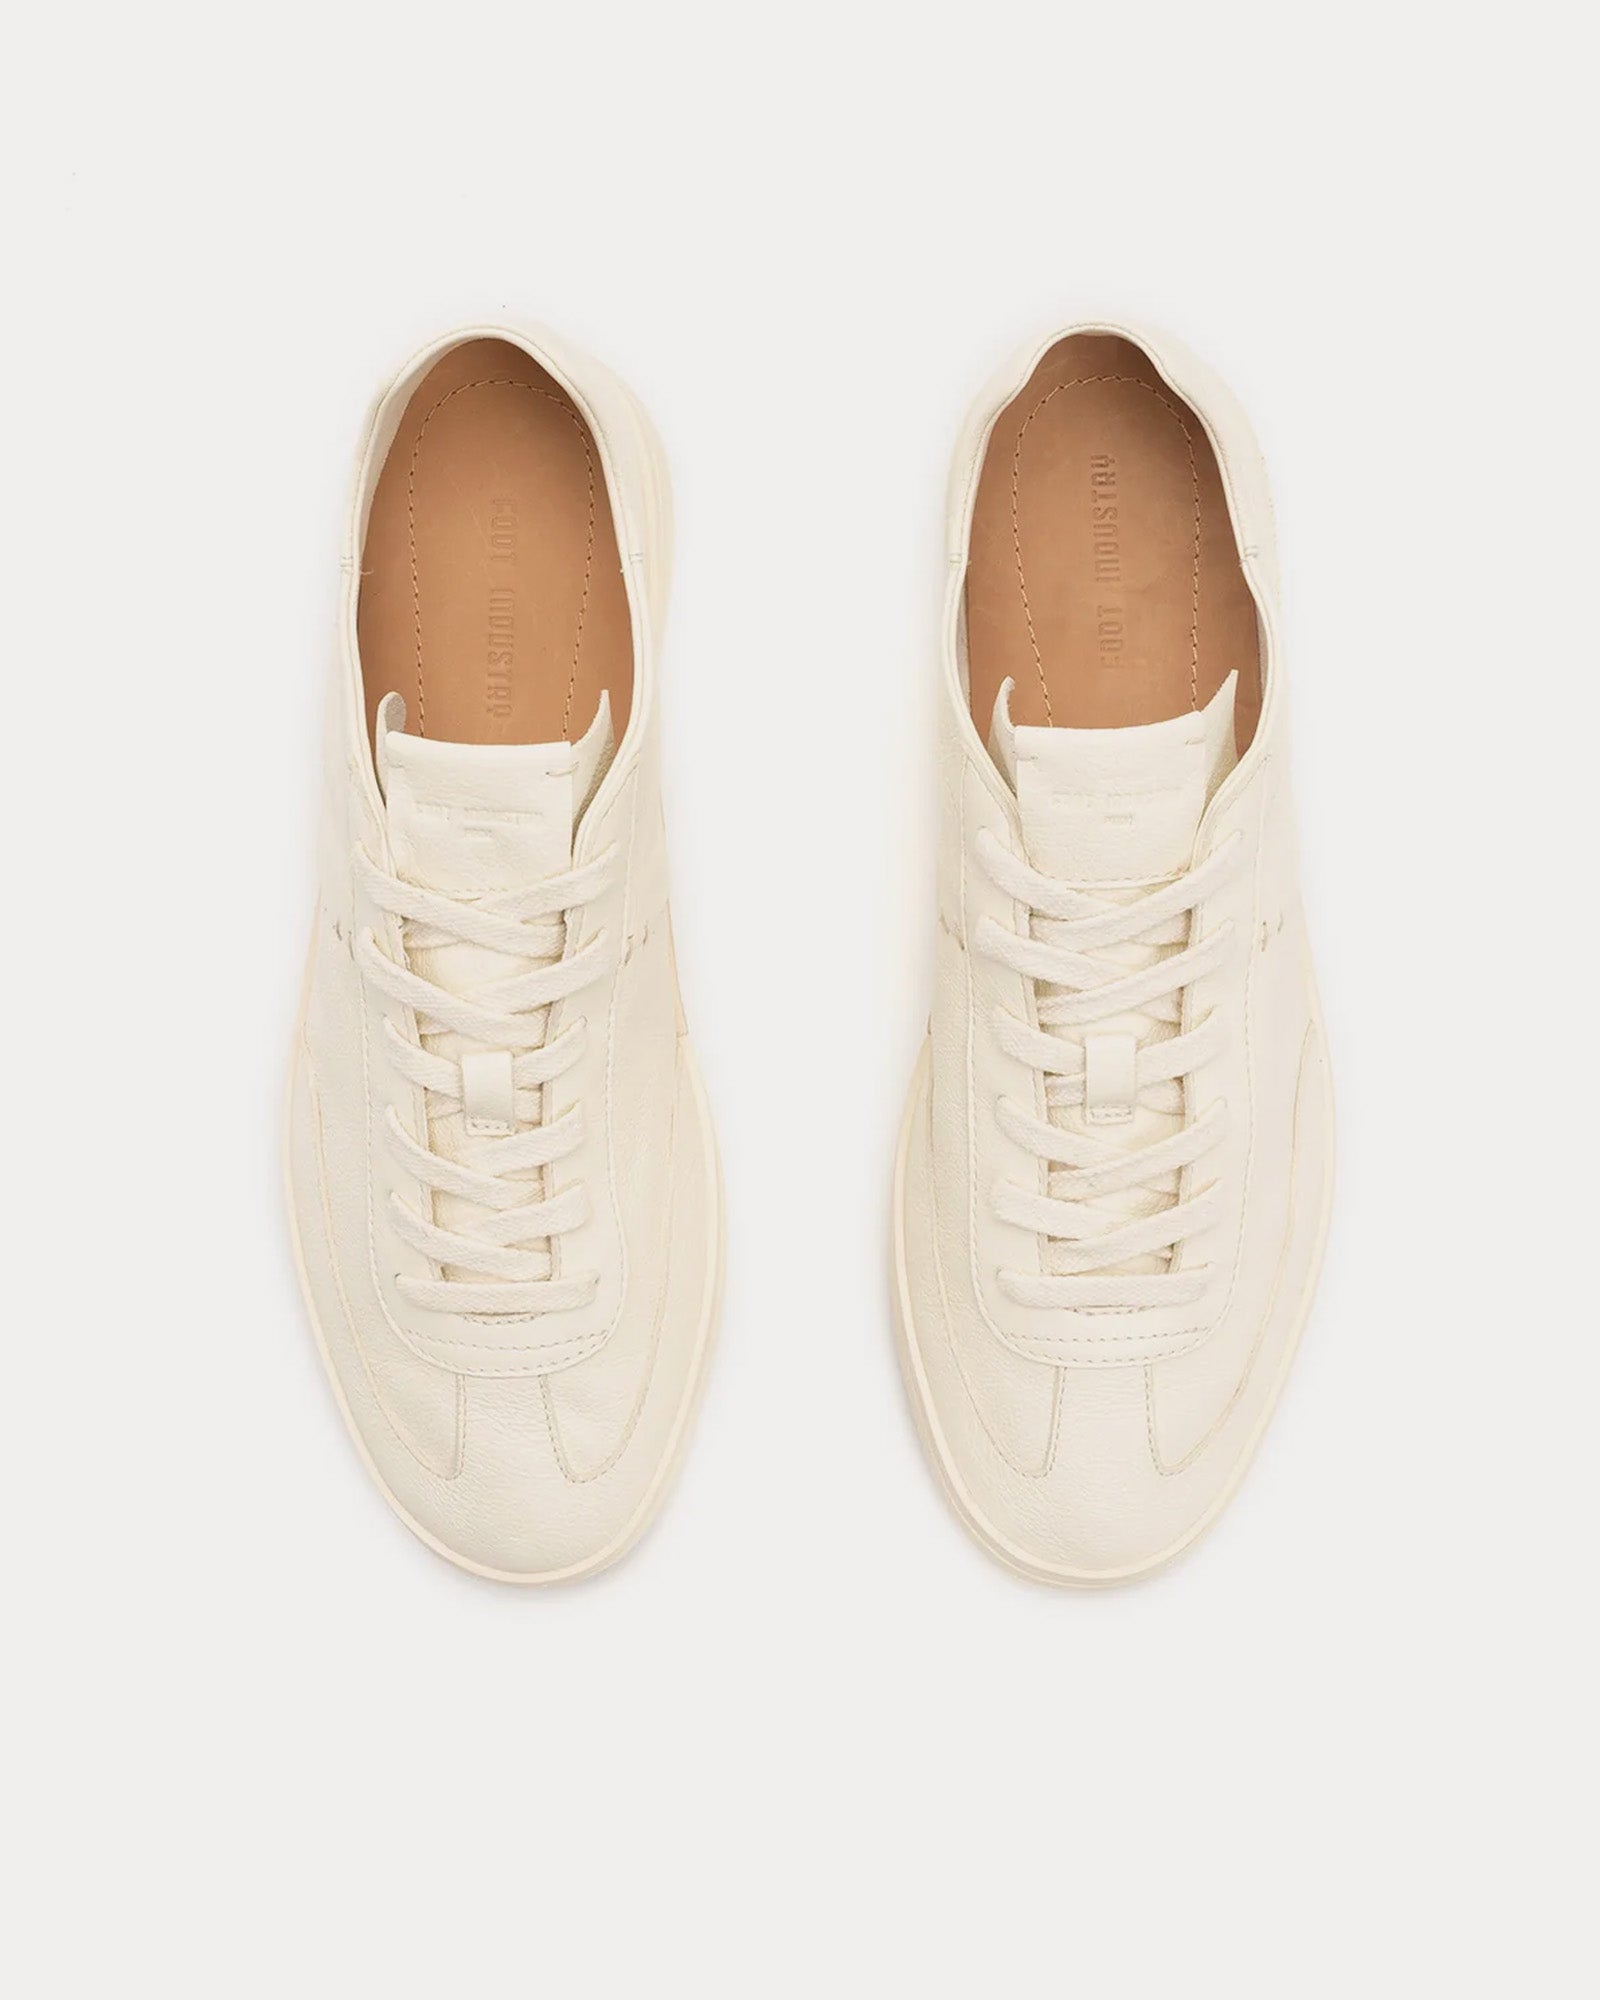 Foot Industry - GAT OP Leather Antique White Low Top Sneakers